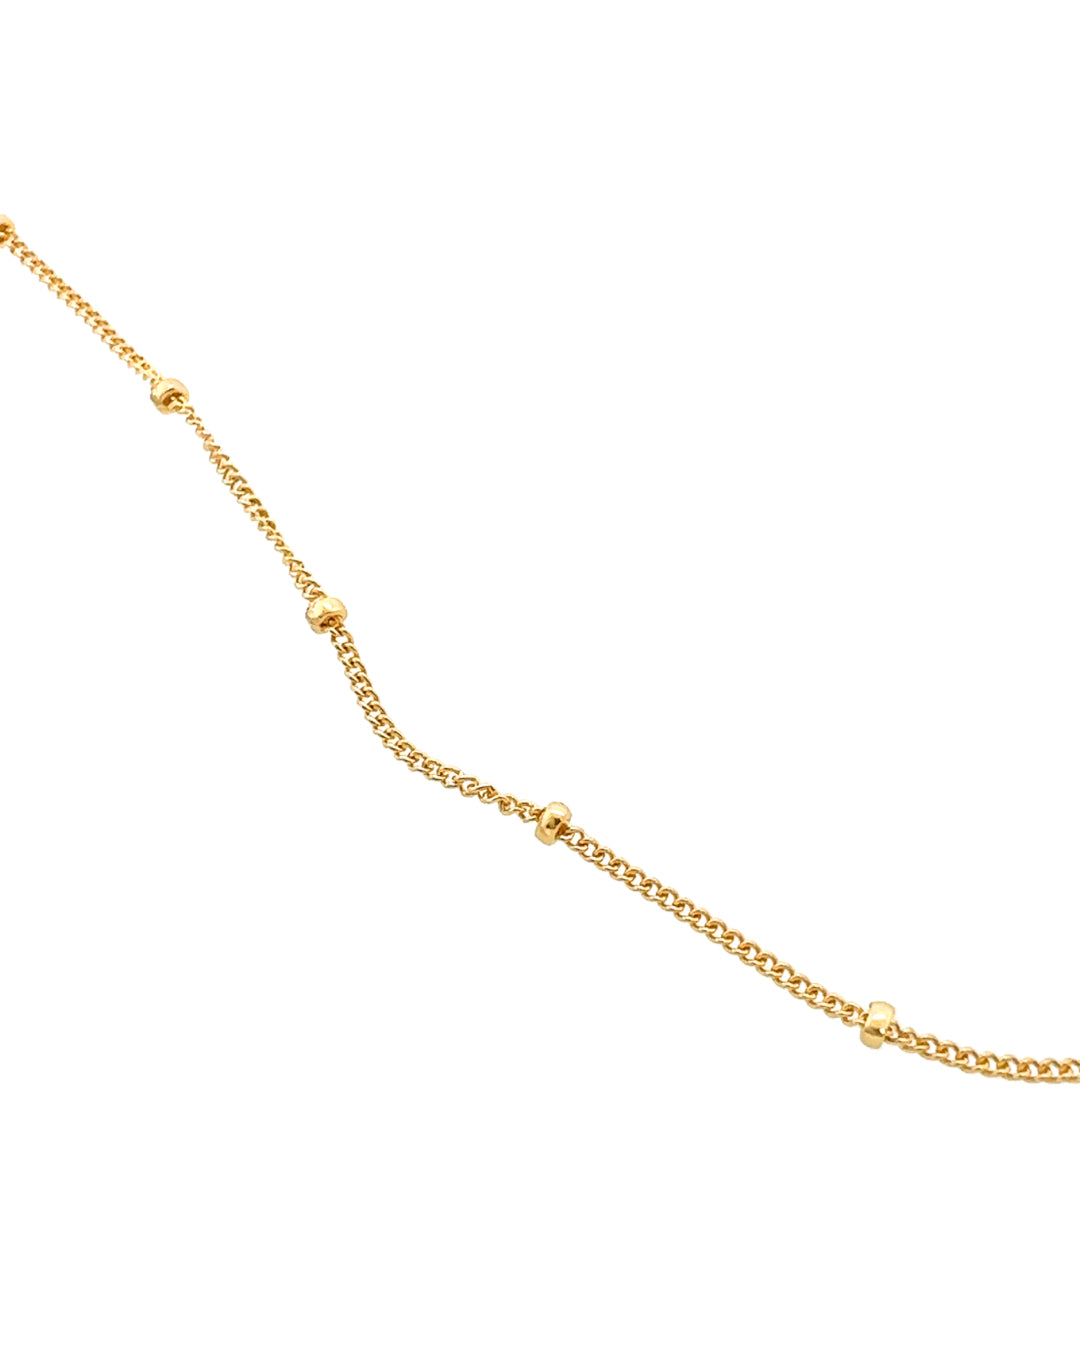 Close up of 14k yellow gold fill satellite bead chain necklace 